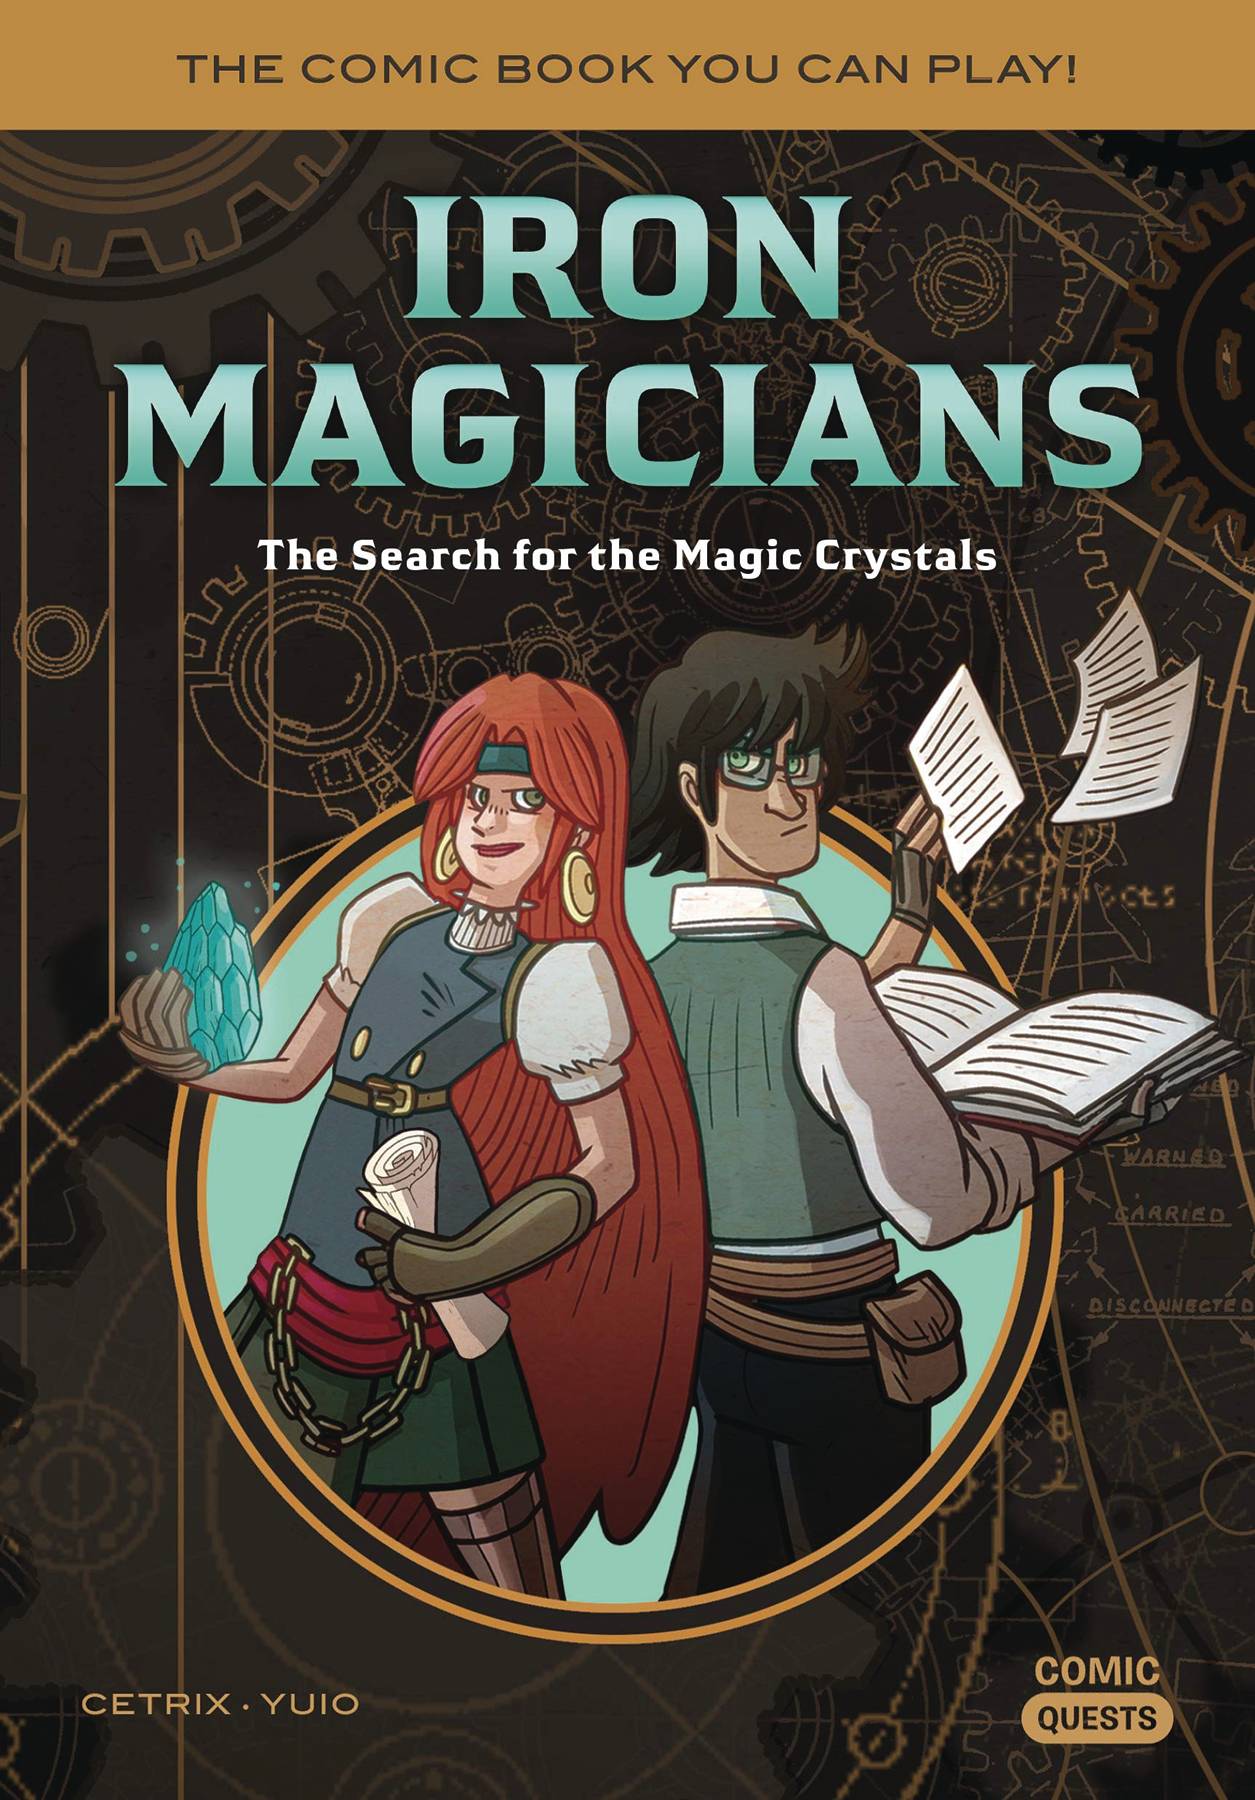 Comic Quests Volume 5 Iron Magicians Search for Magic Crystals